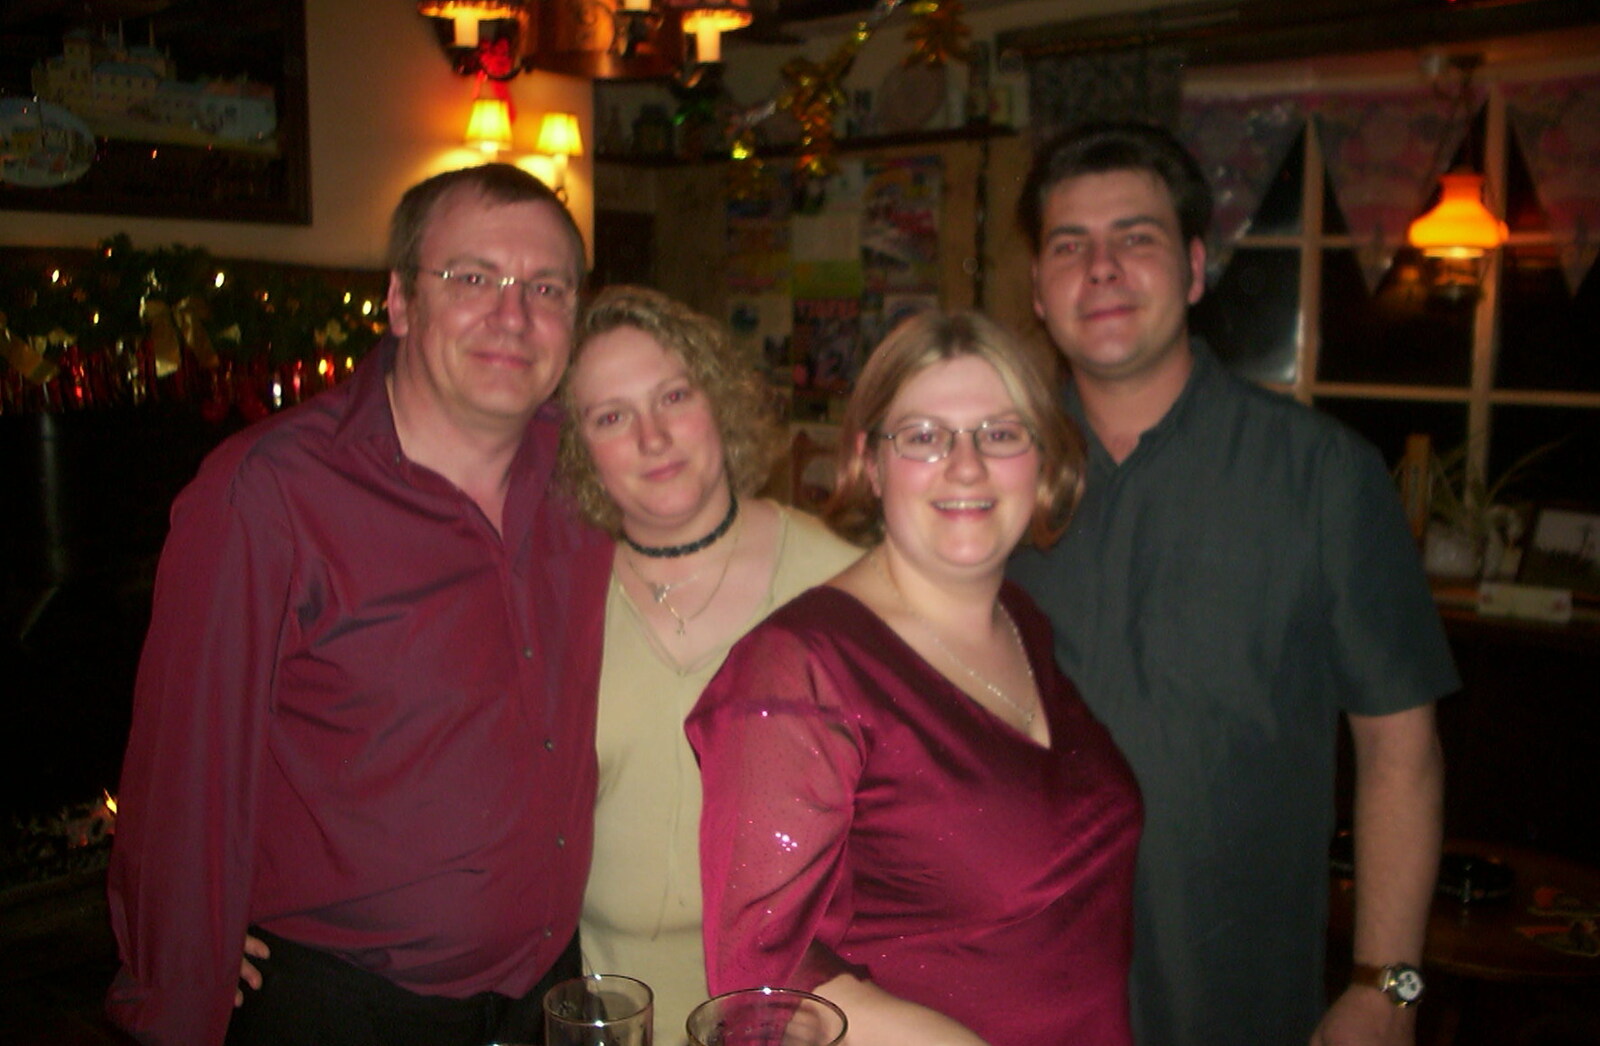 New Year's Eve at the Swan Inn, Brome, Suffolk - 31st December 2002: A slightly blurry group photo